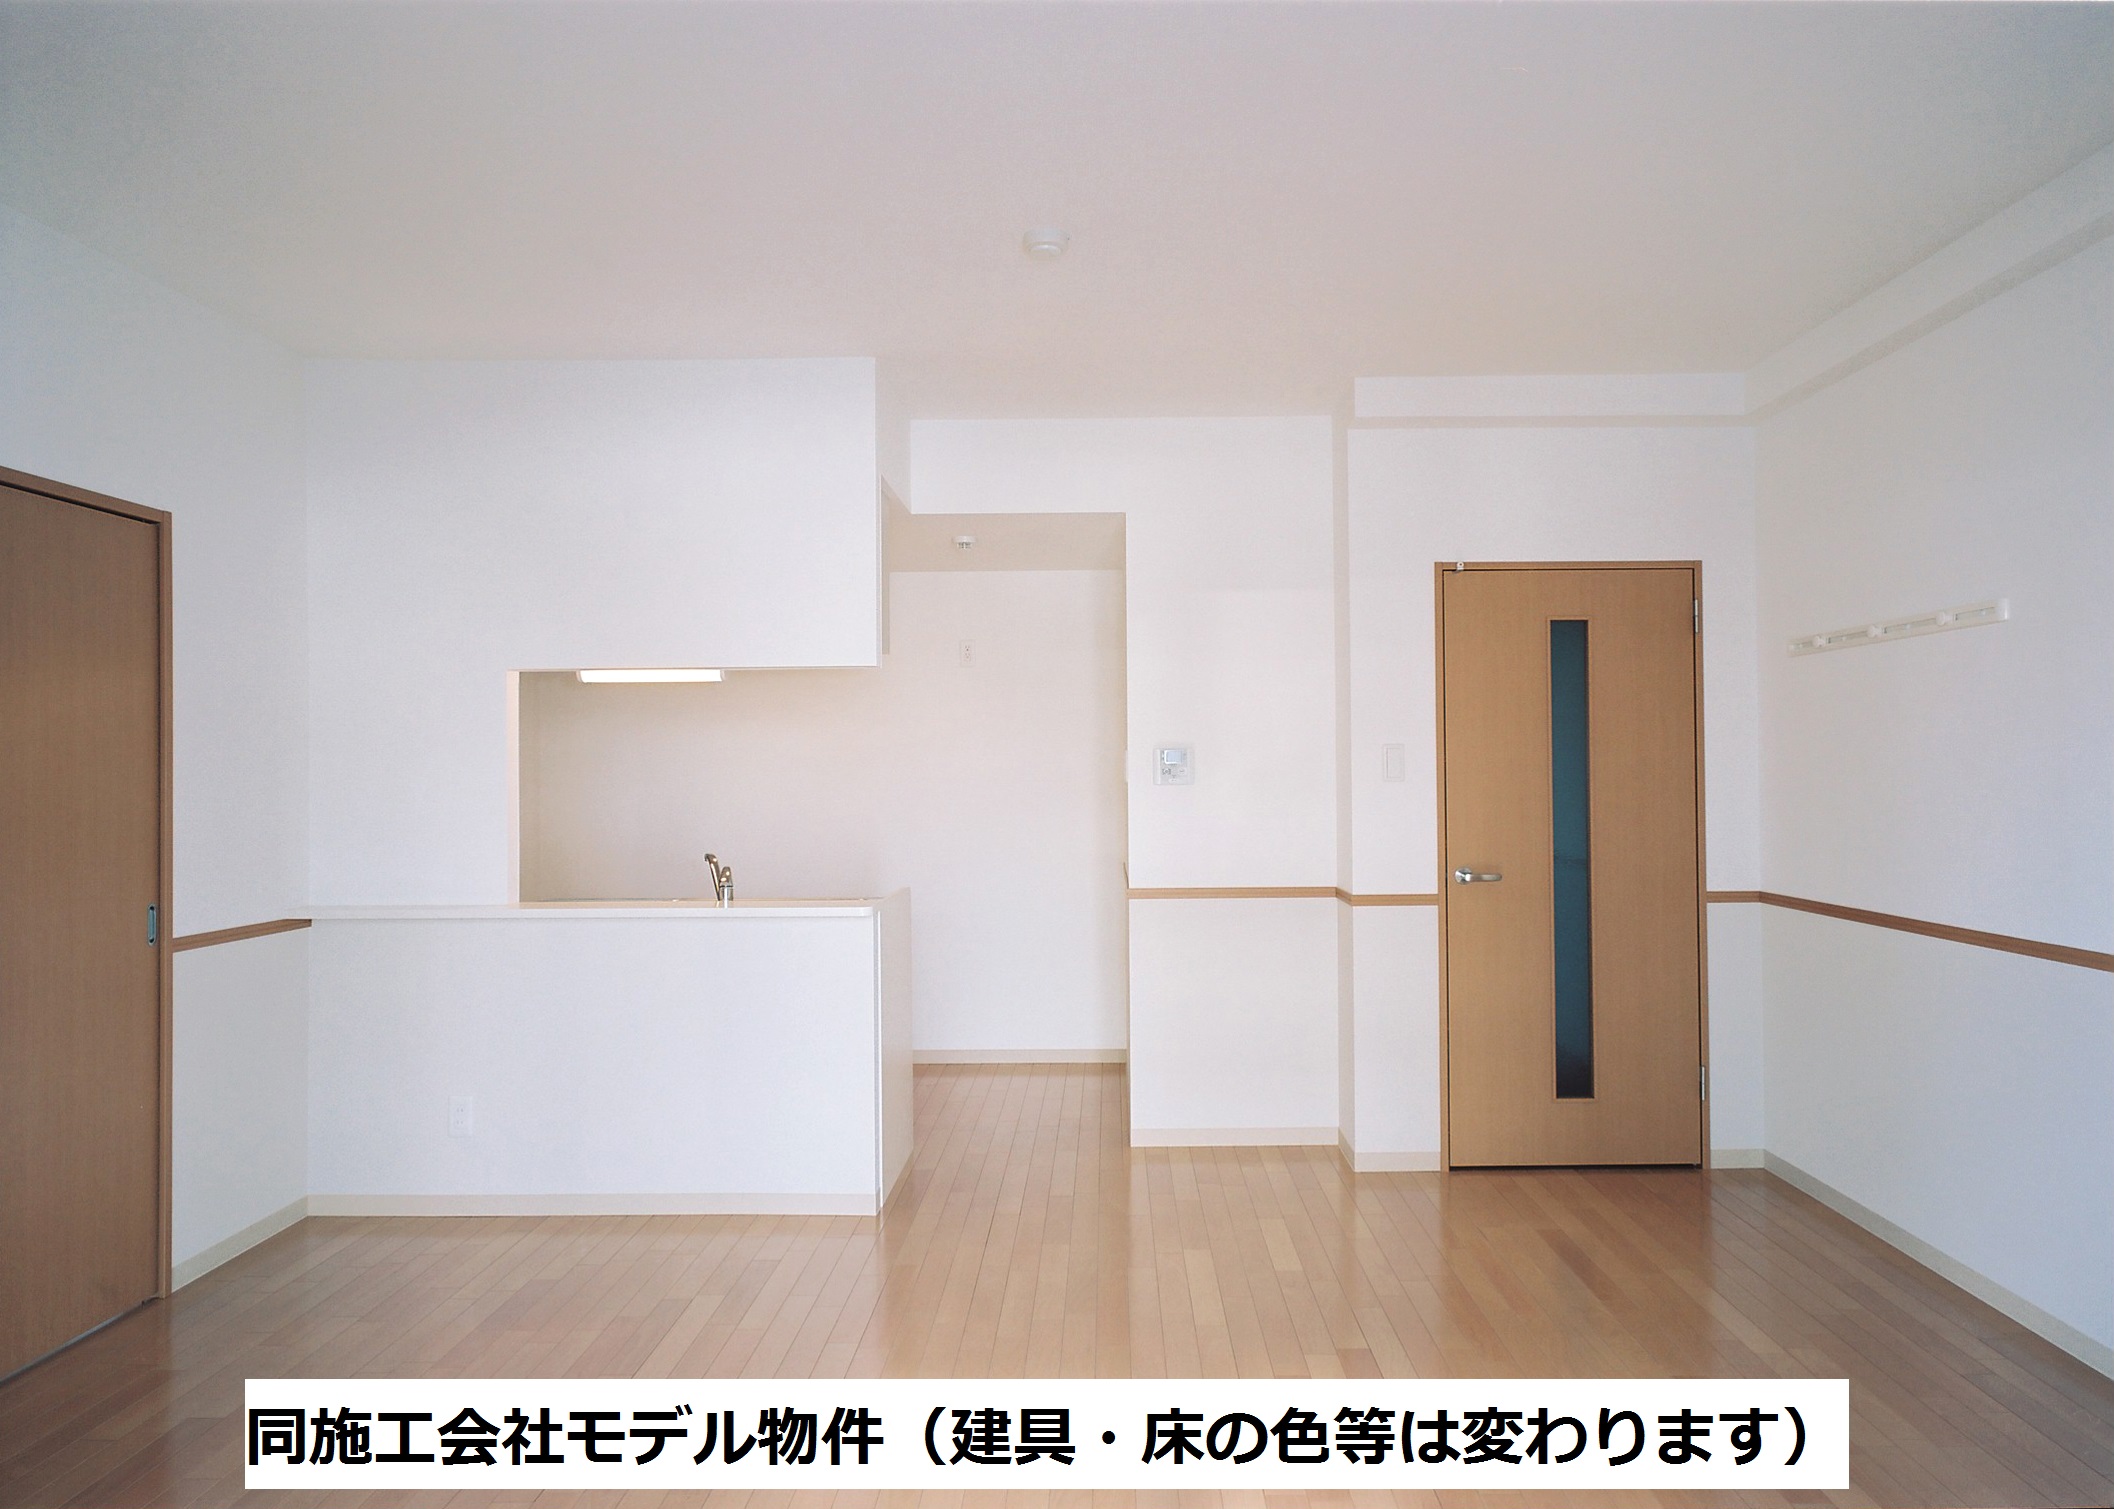 Living and room. Same construction company model properties Joinery ・ The color of the floor will change